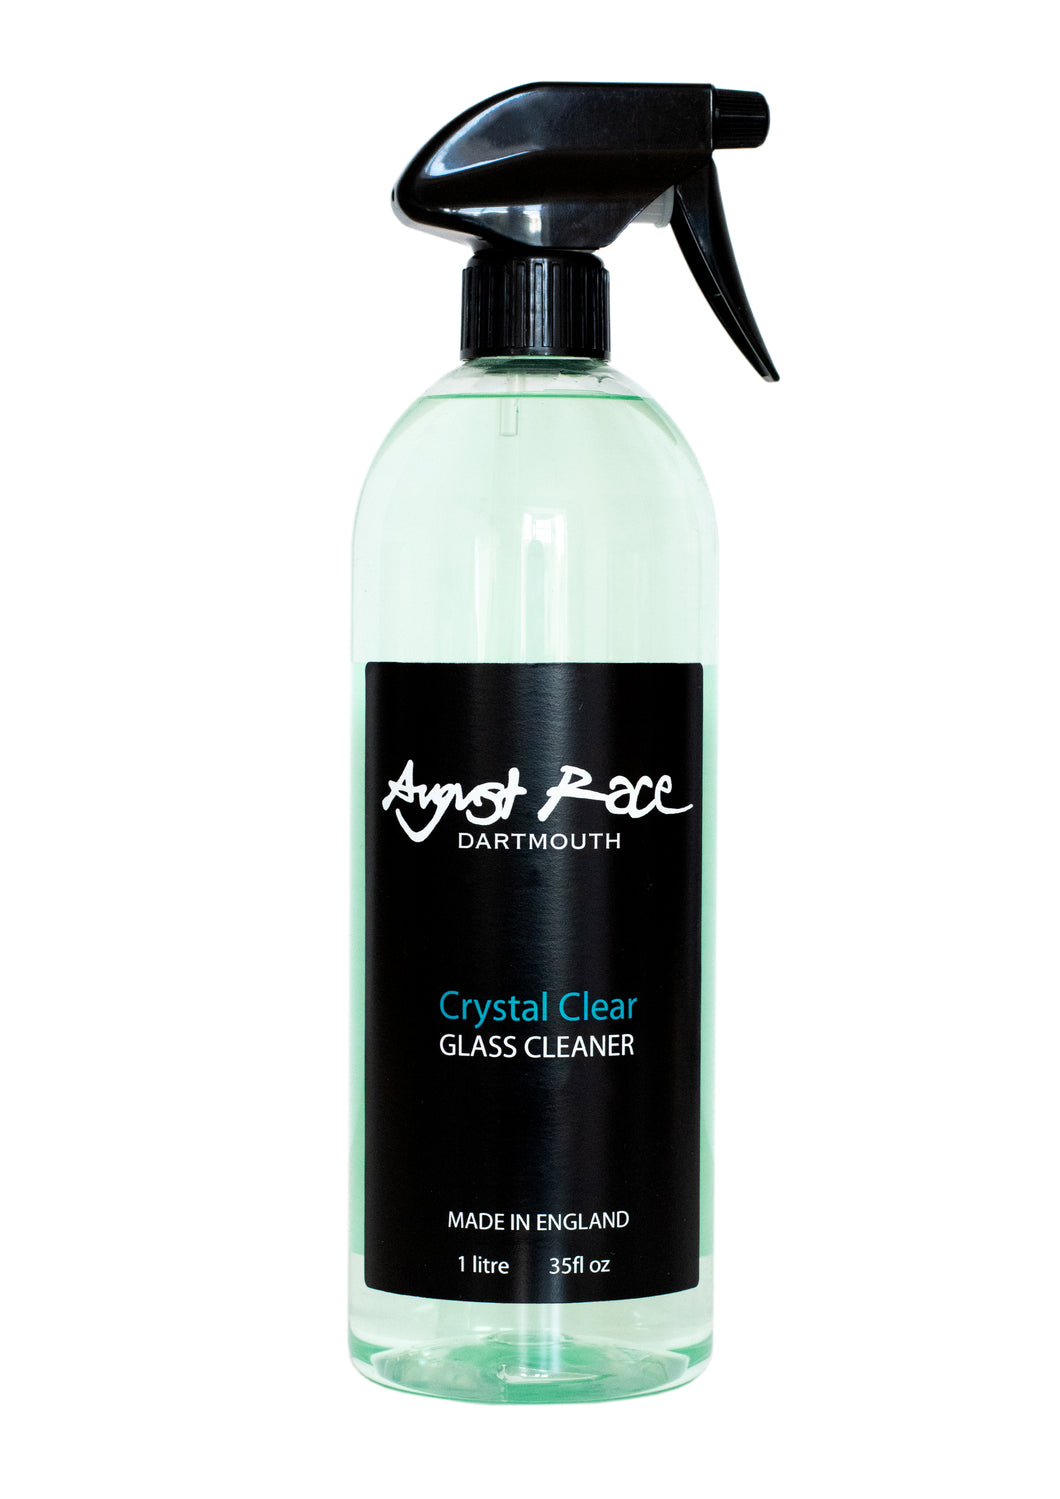 August Race Crystal Clear Glass Cleaner 1 Litre